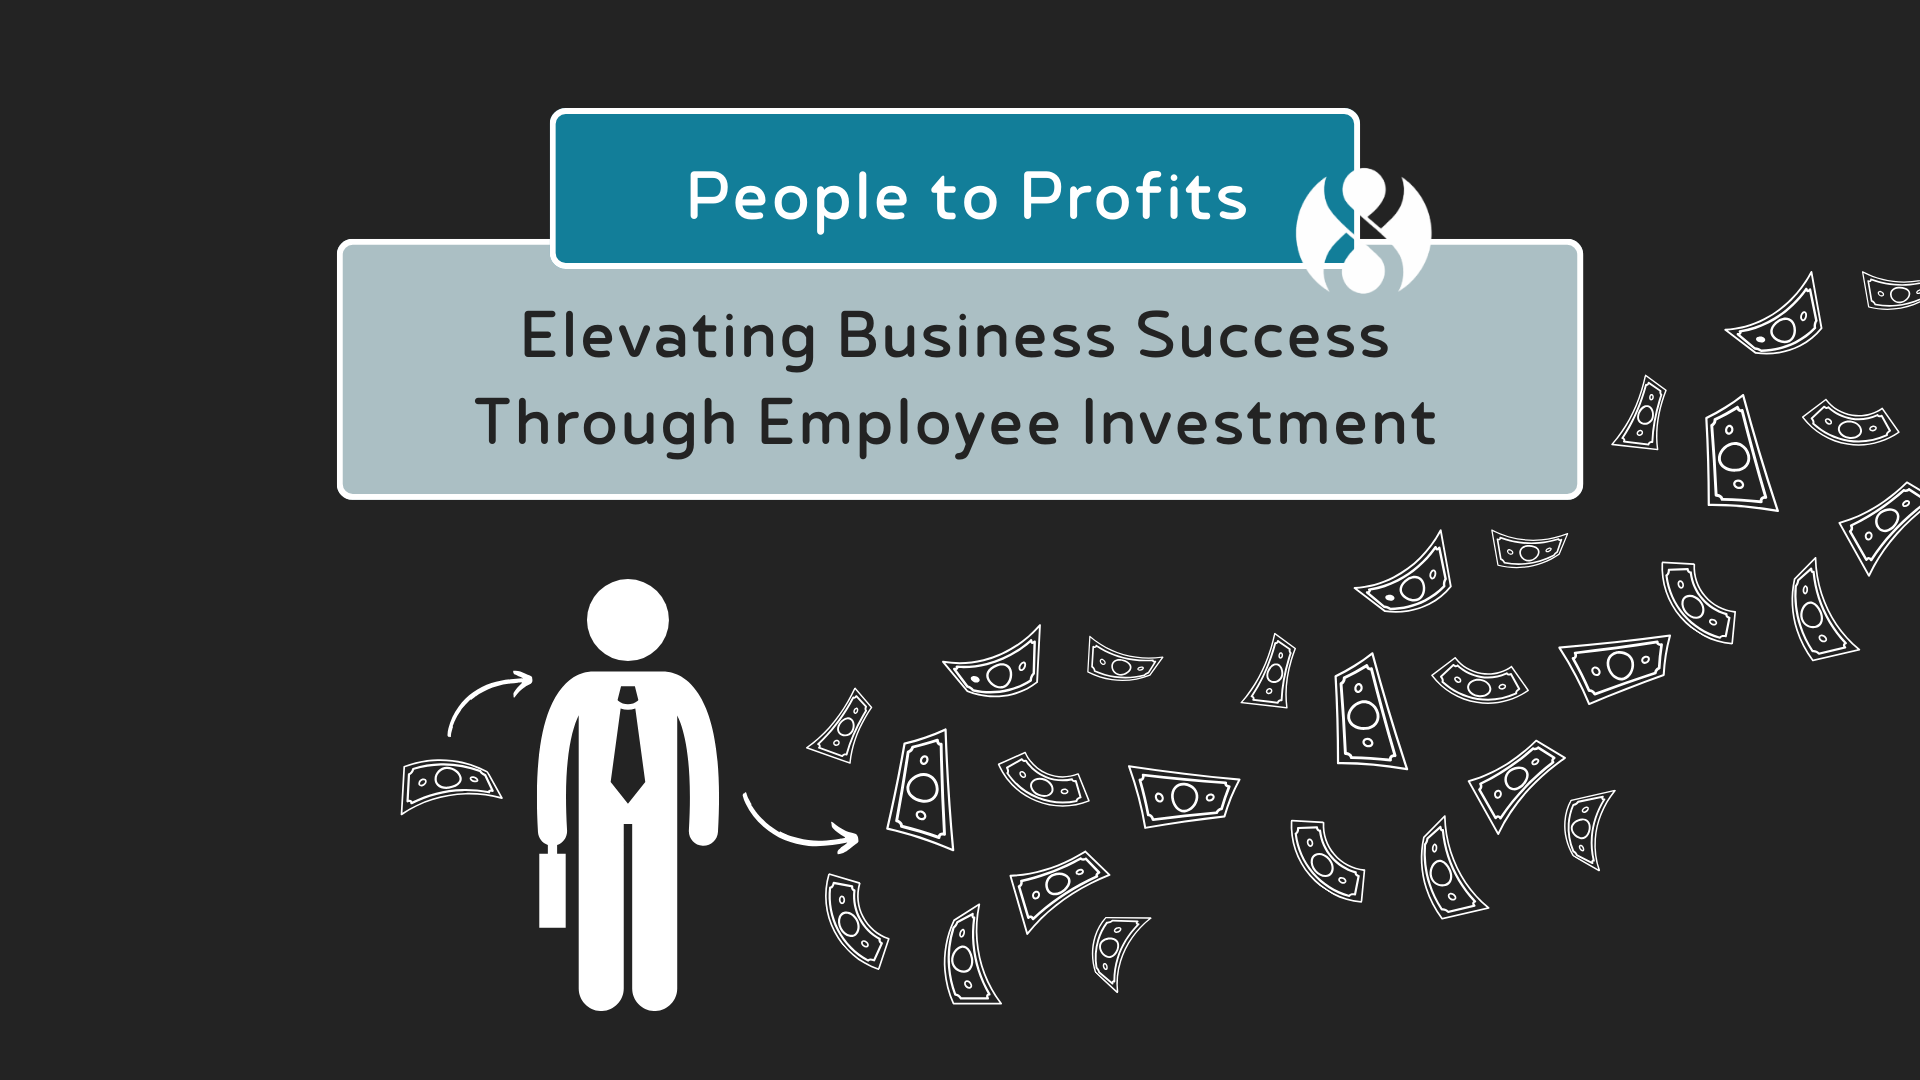 https://rumin8group.com/people-to-profits-how-to-elevate-your-business-success-through-employee-investment/